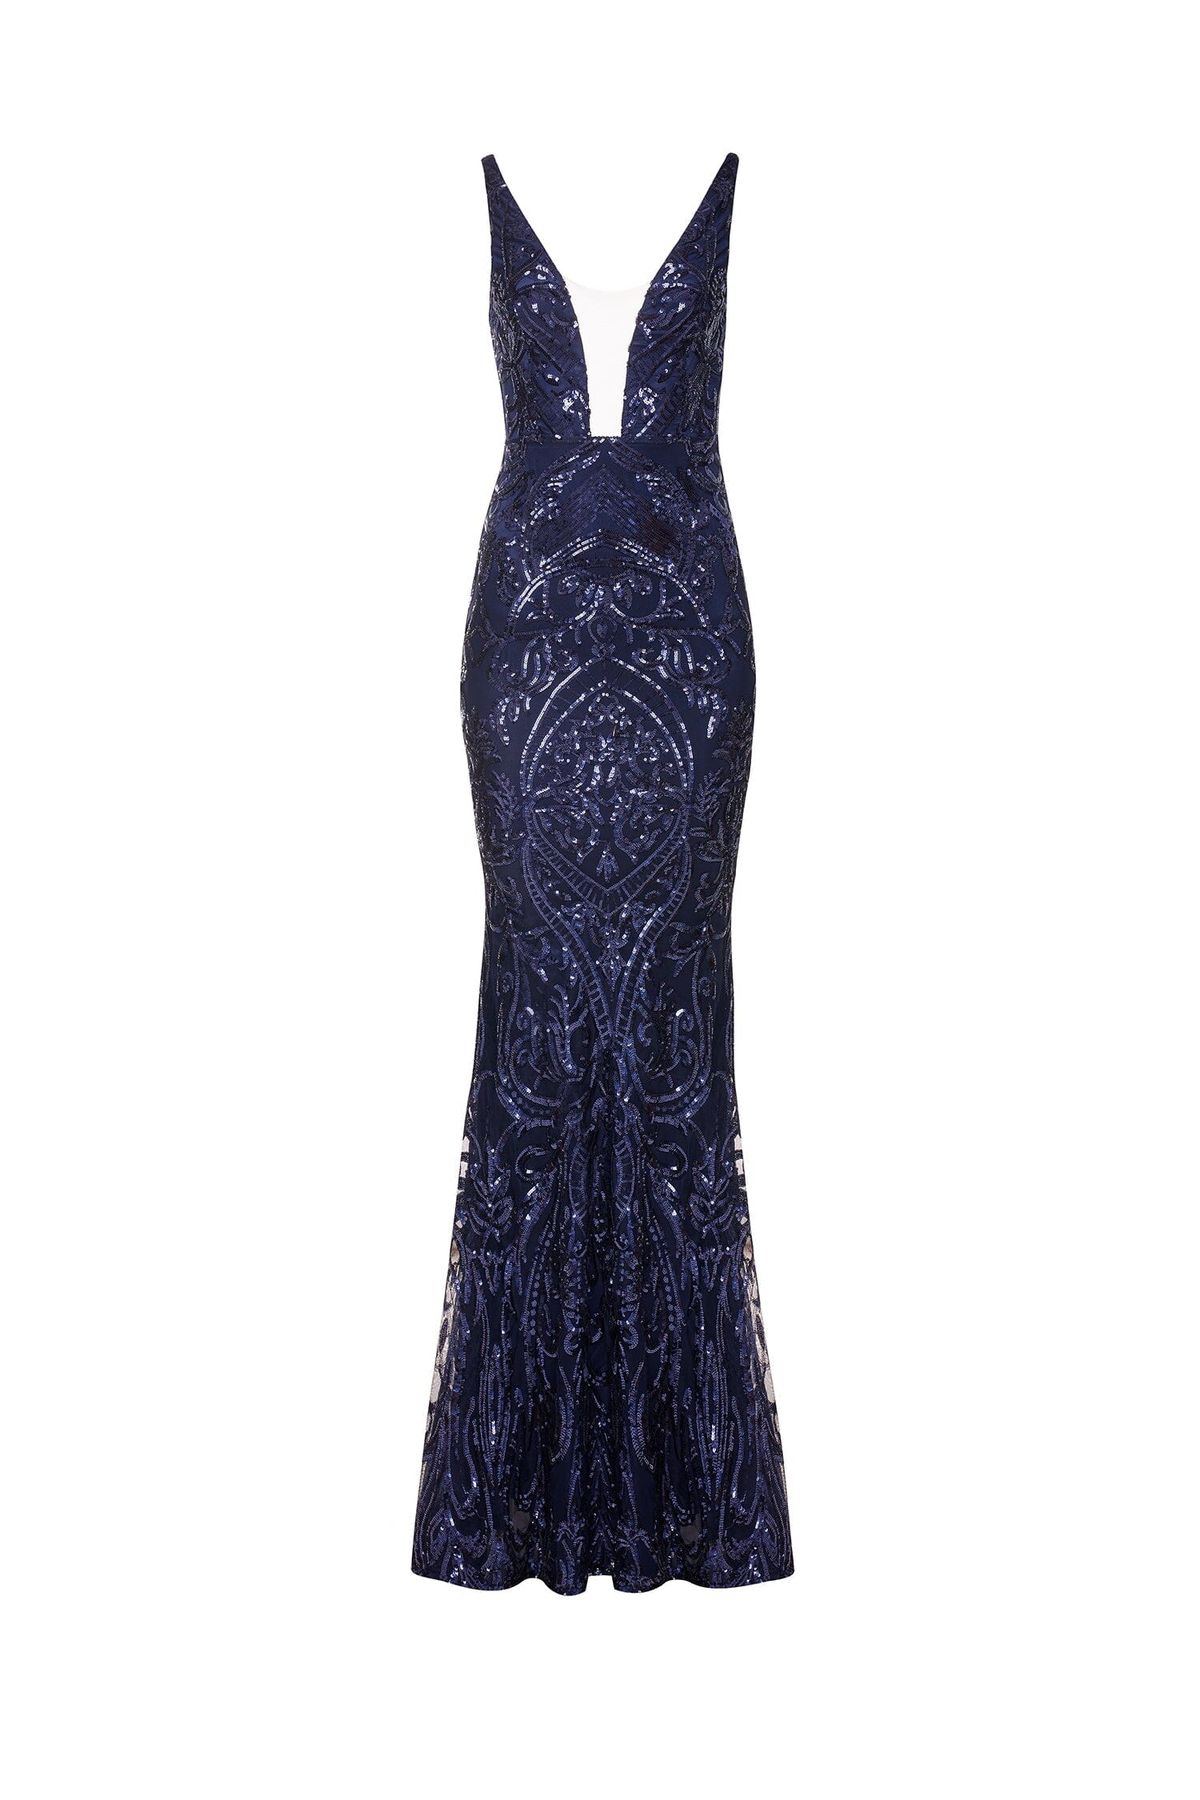 Style Salma Alamour The Label Size XS Prom Plunge Sheer Navy Blue Mermaid Dress on Queenly